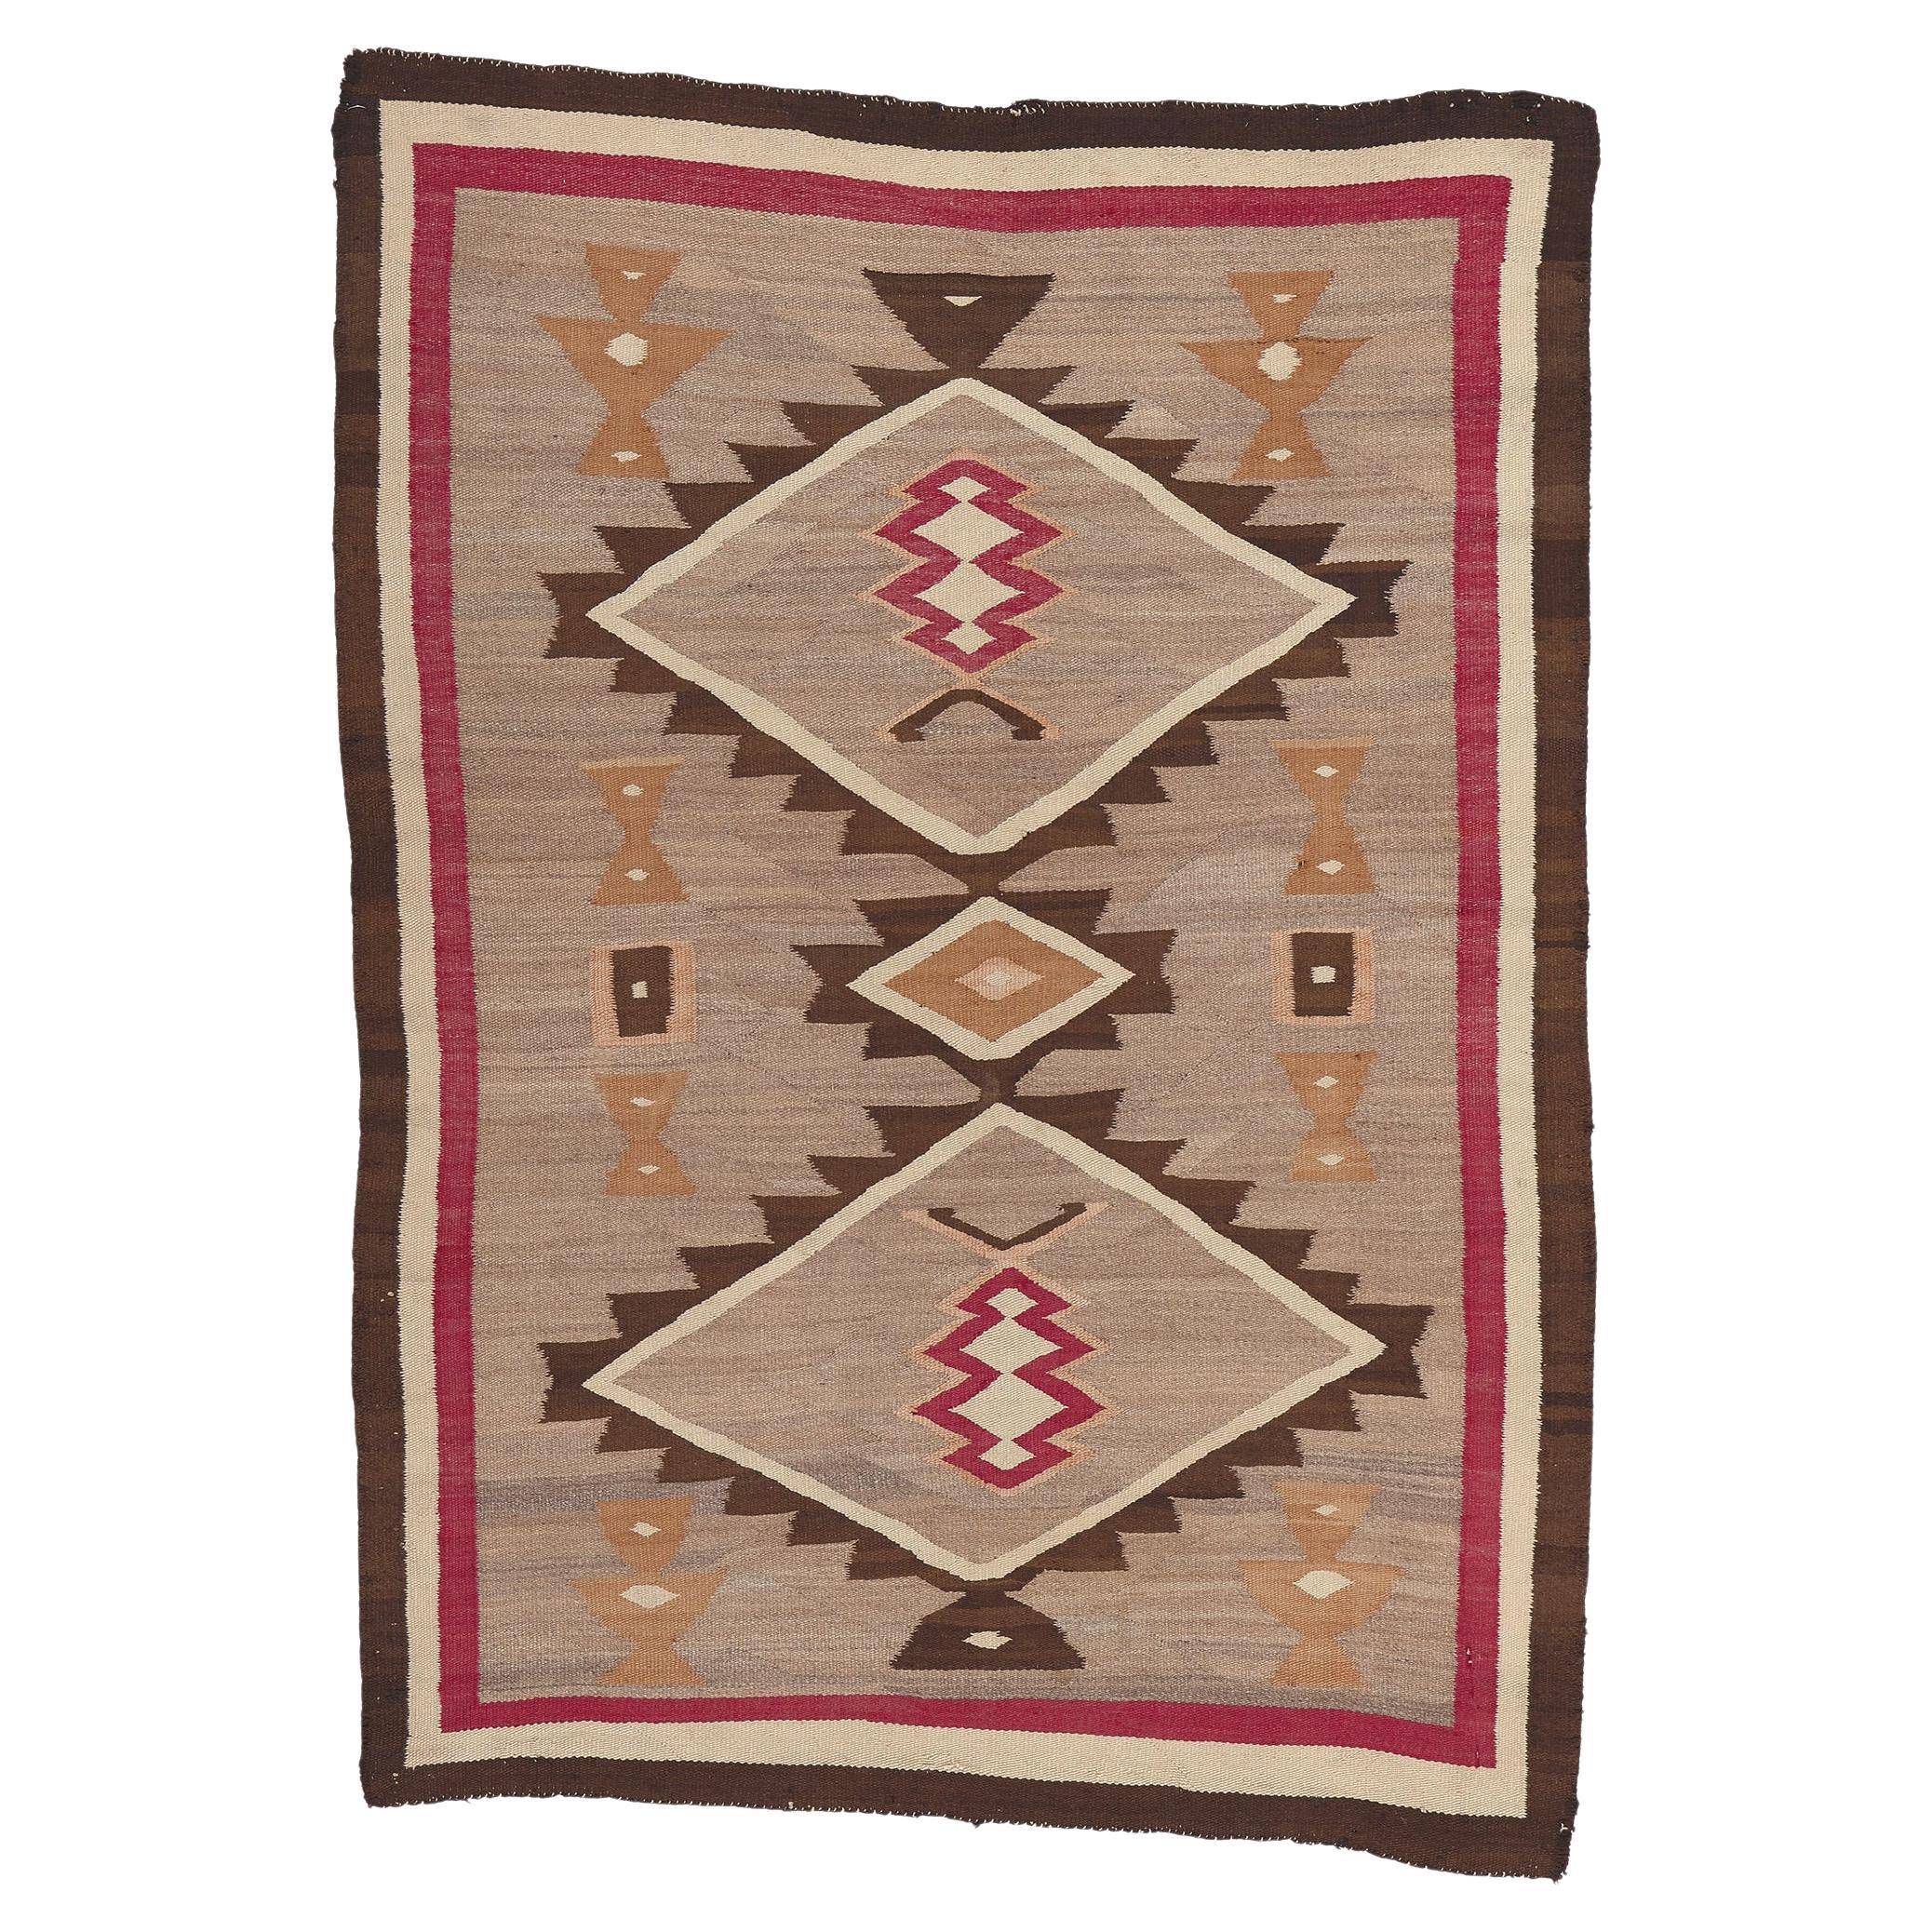 Antique Crystal Navajo Rug  Southwest Style Meets Native American